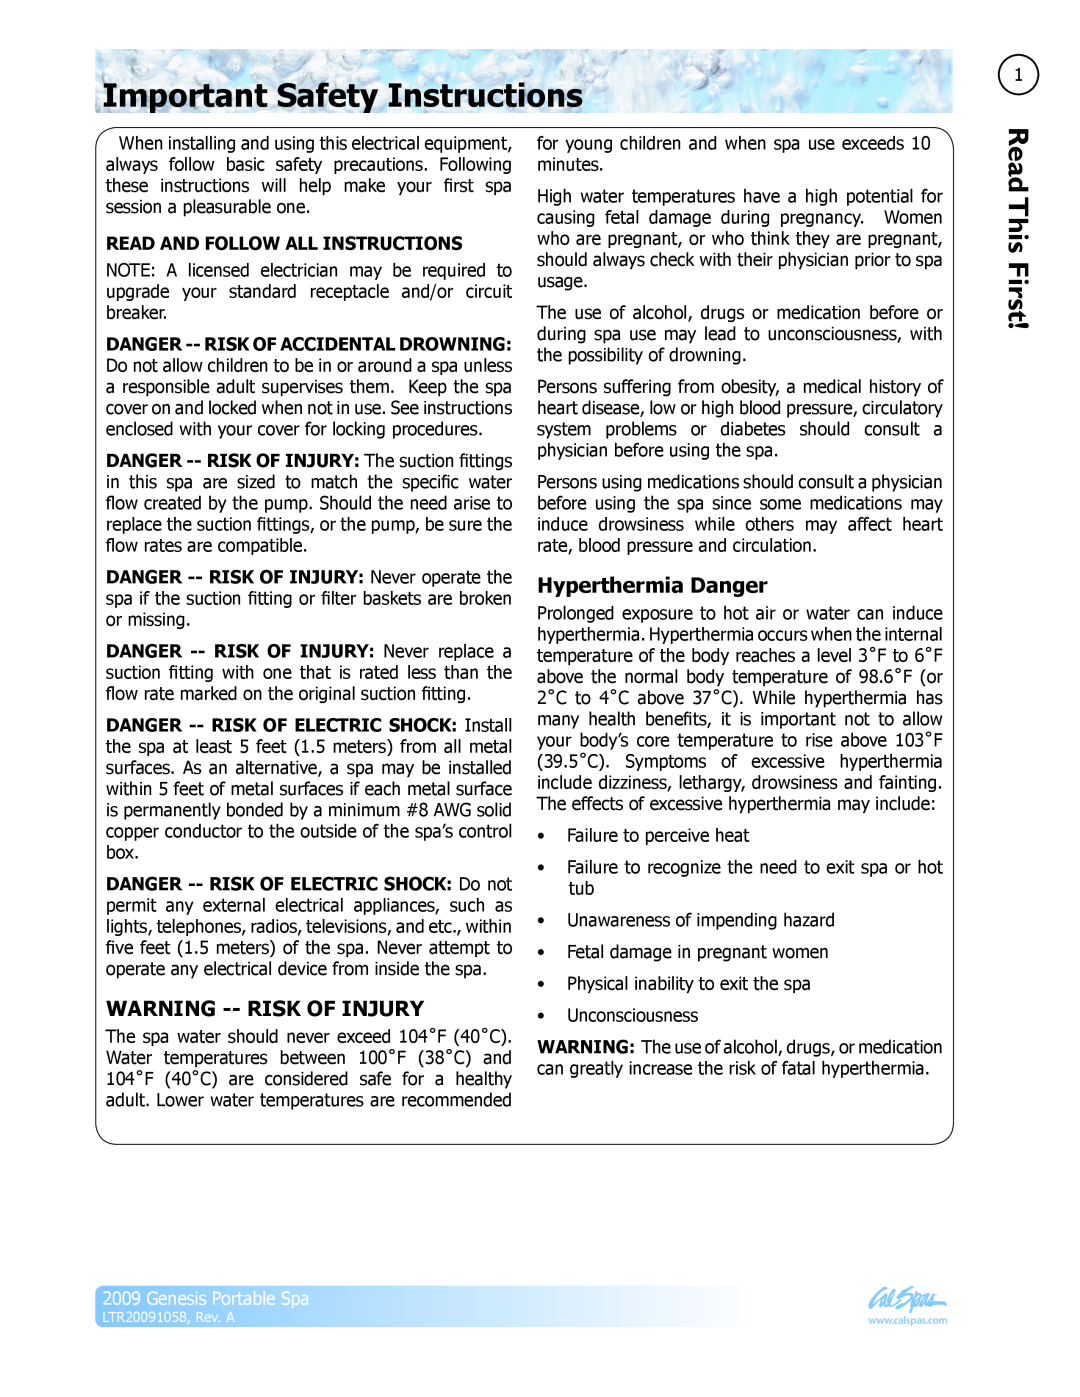 Cal Spas Genesis Portable Spa manual Important Safety Instructions, Read This First, Warning --Risk Of Injury 